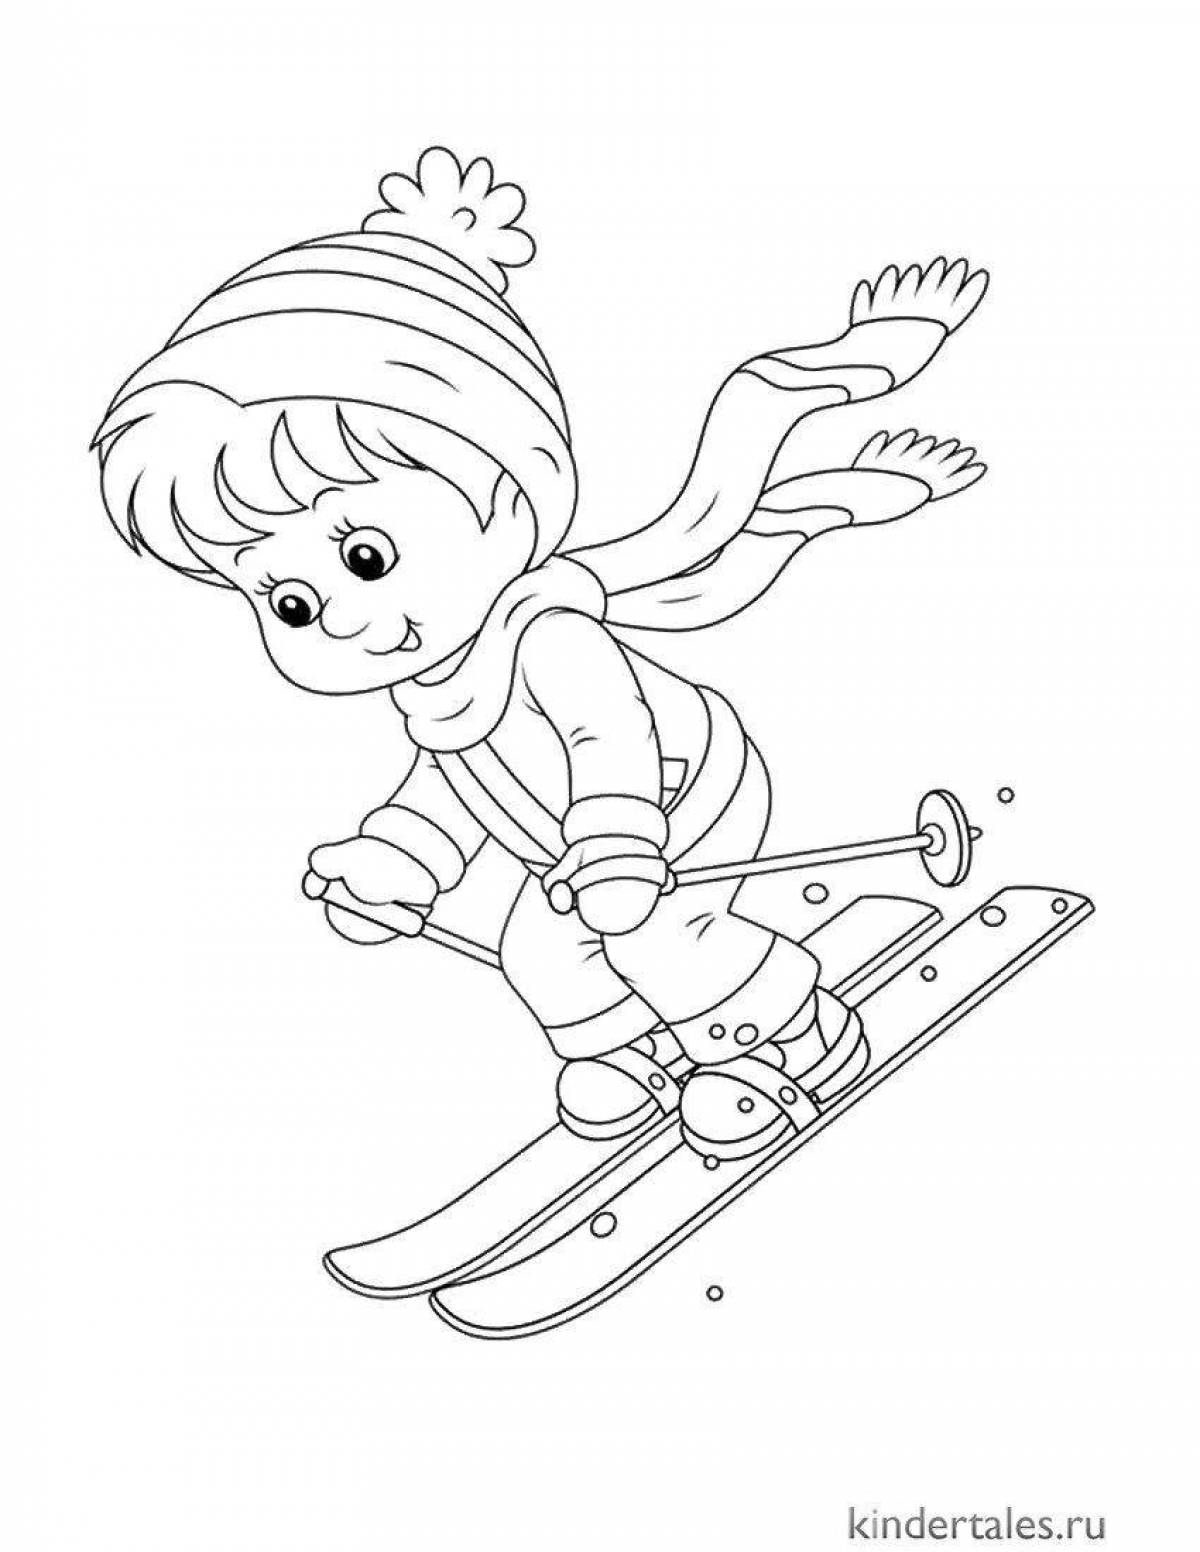 Coloring book energetic skier for children 5-6 years old